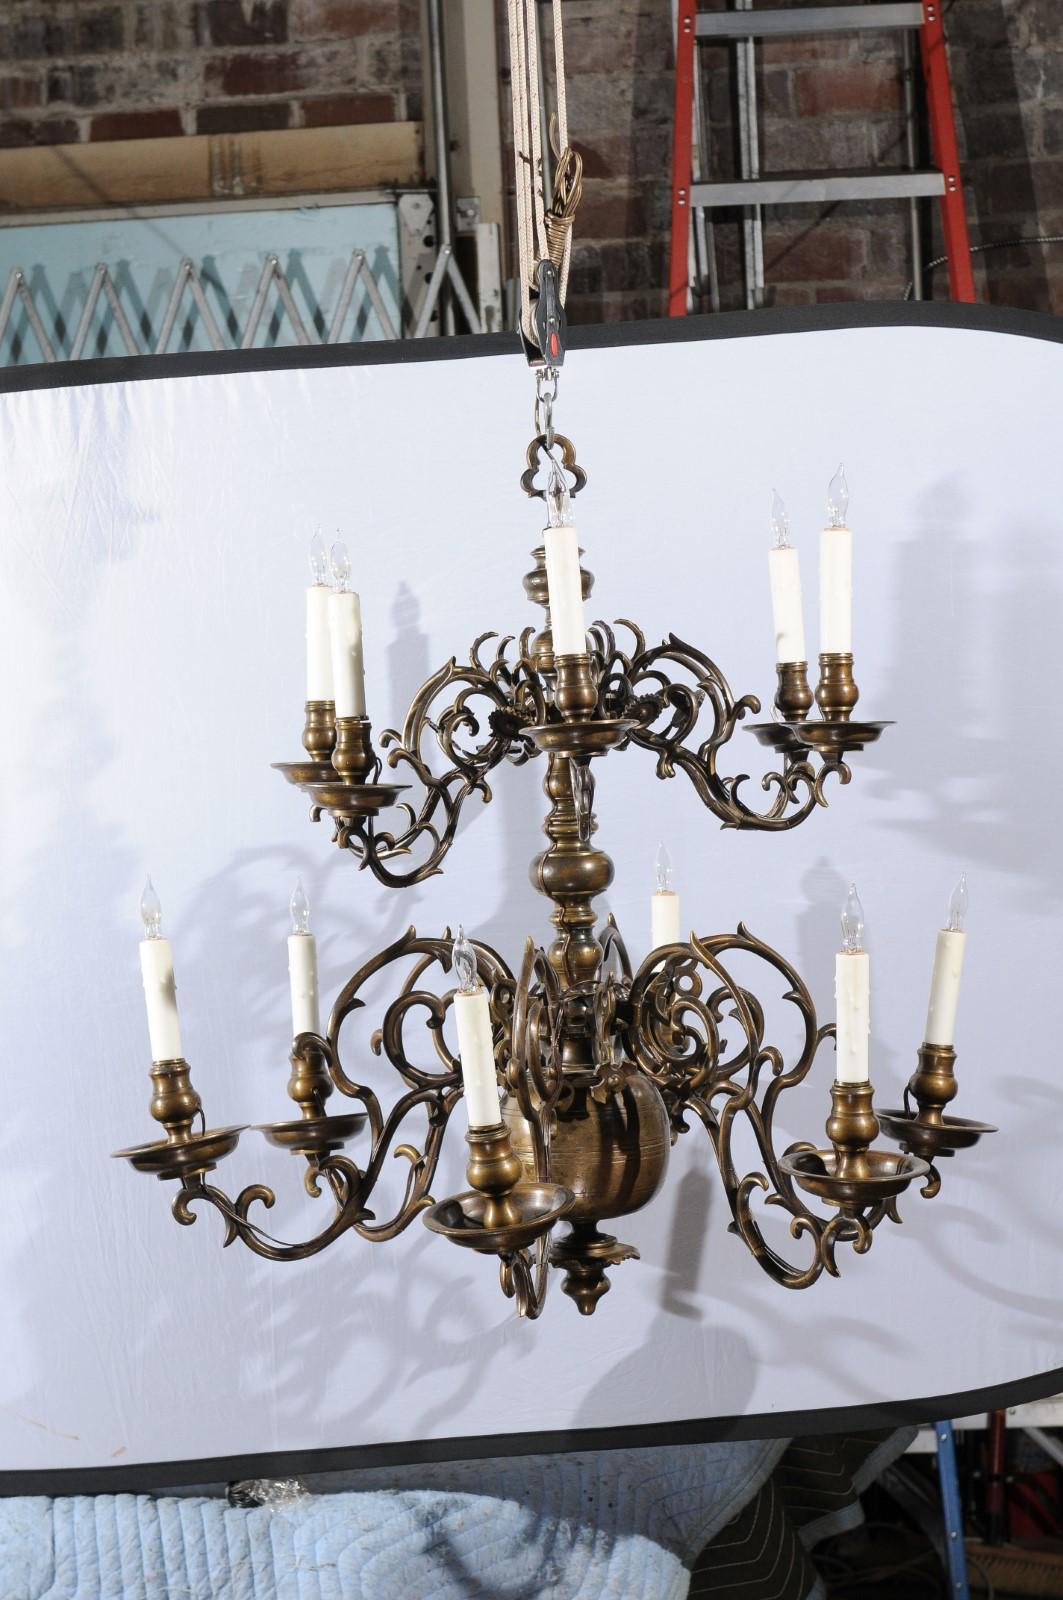 A large 2-Tier Dutch Brass Chandelier with 12 Lights from the 18th century.